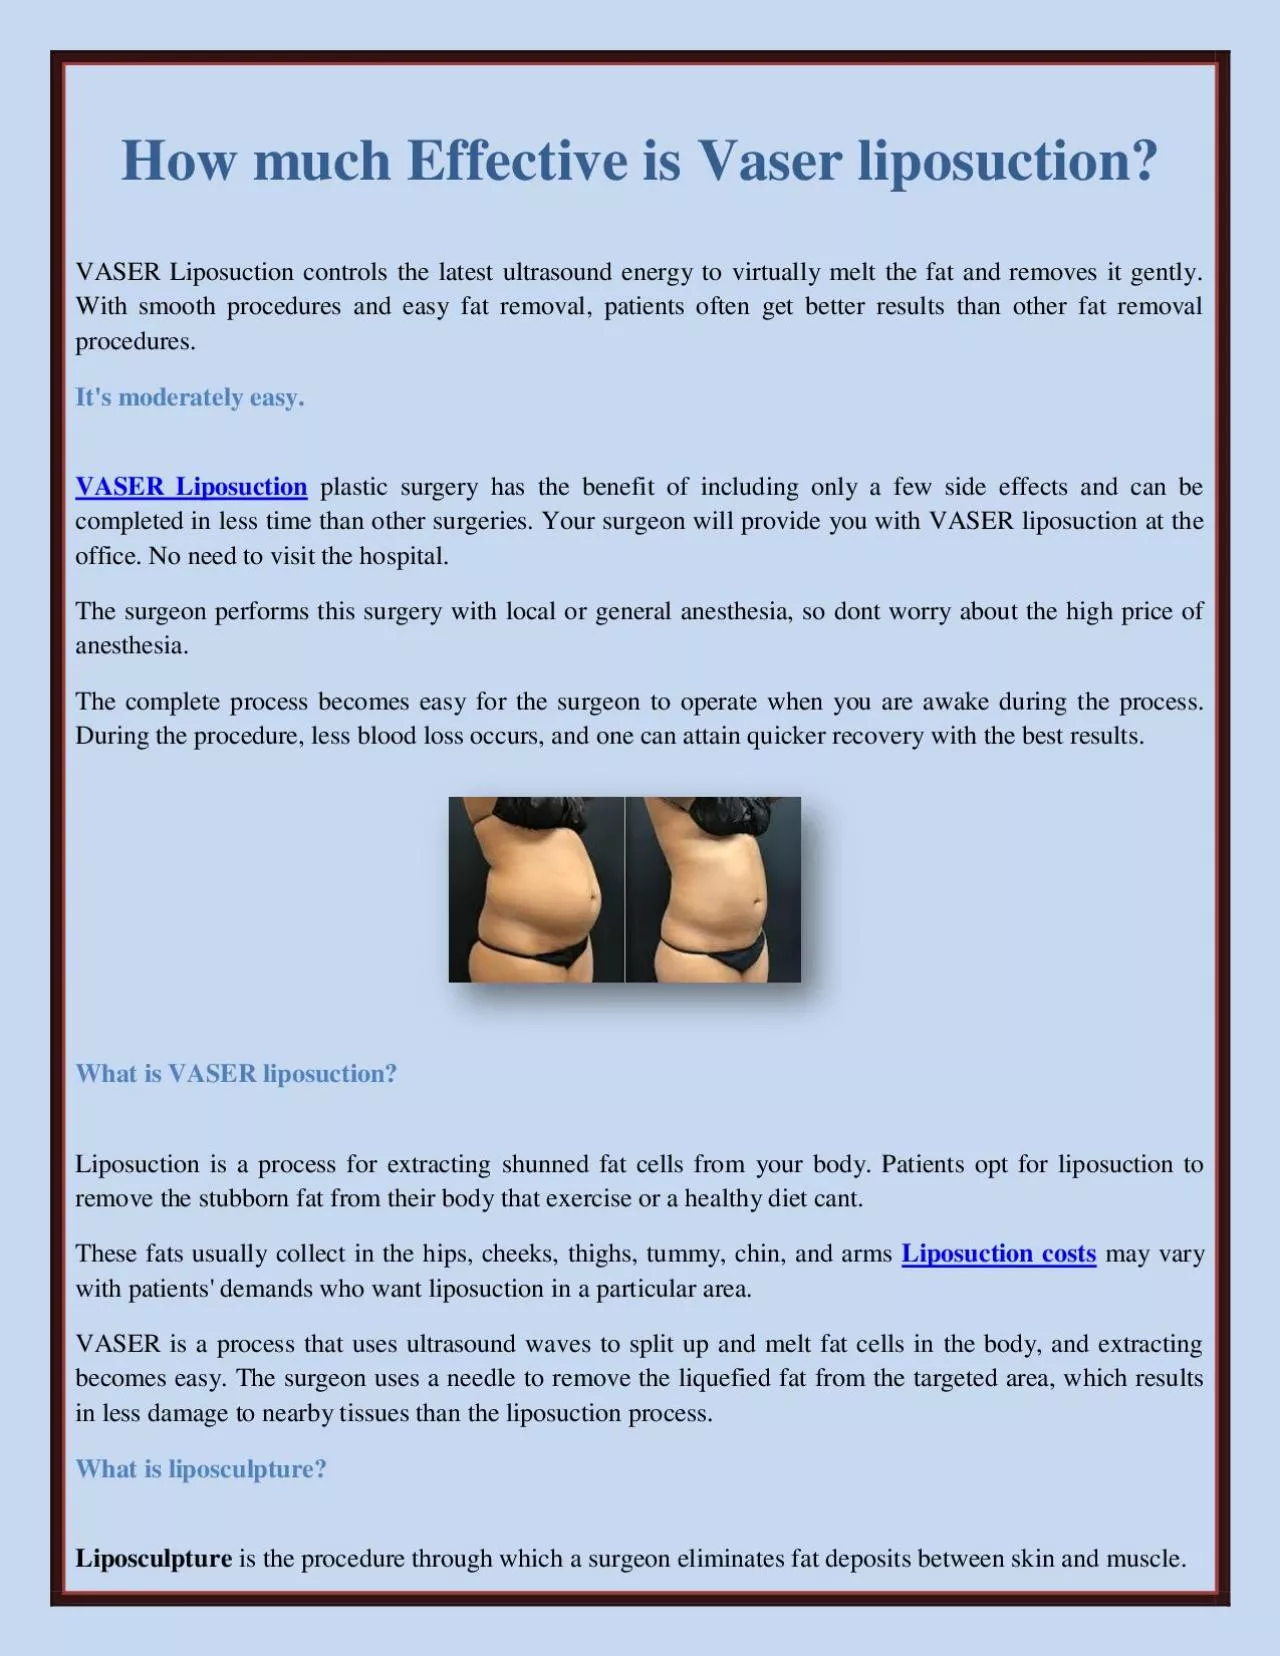 How much Effective is Vaser liposuction?